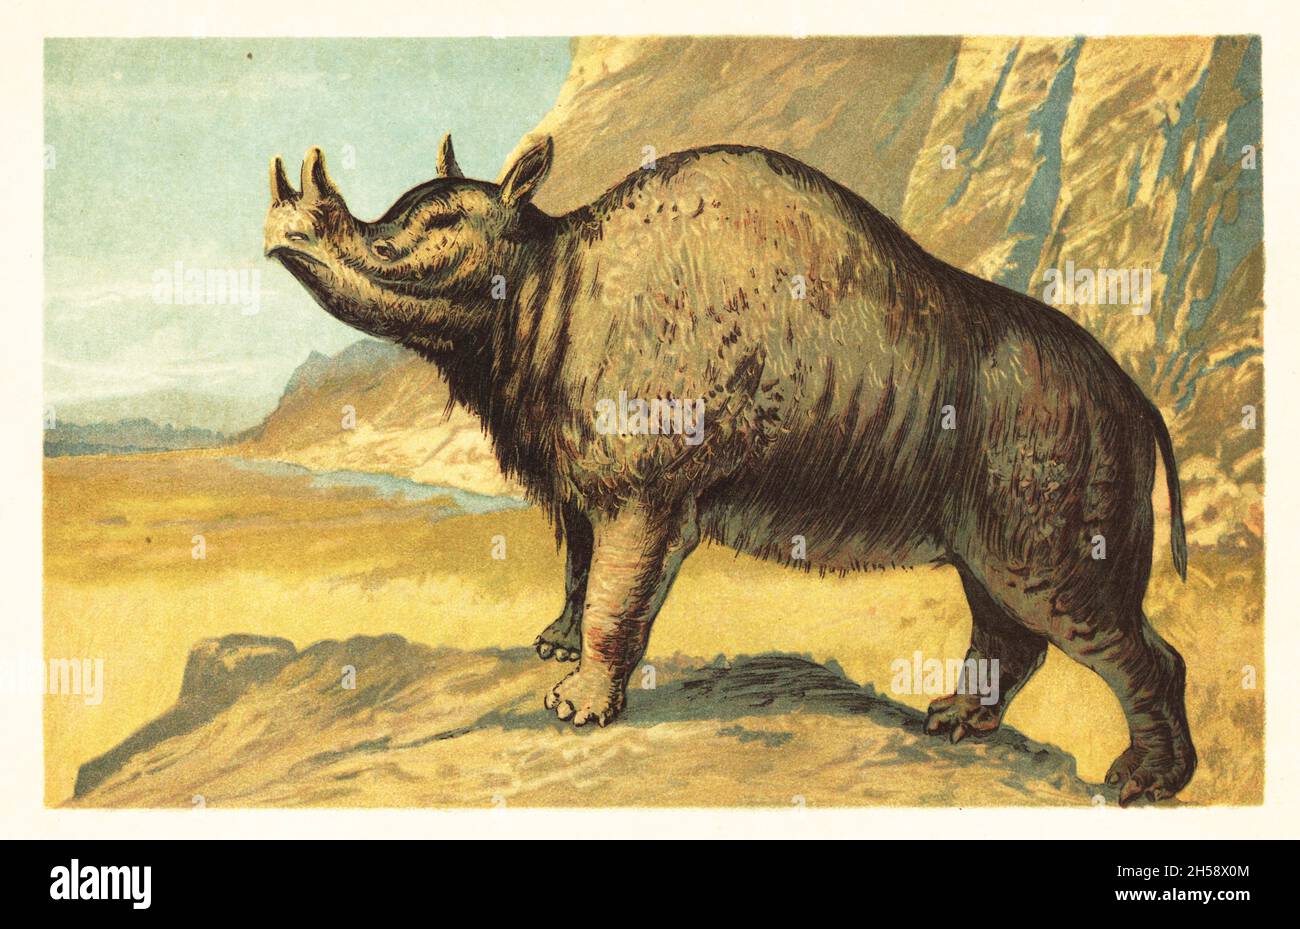 Brontops robustus or Megacerops robustus, extinct species of odd-toed ungulate, rhinoceros-like browser of the Late Eocene. Brontops, Titanotherium robustum Leidy.Colour printed illustration by F. John from Wilhelm Bolsche’s Tiere der Urwelt (Animals of the Prehistoric World), Reichardt Cocoa company, Hamburg, 1908. Stock Photo